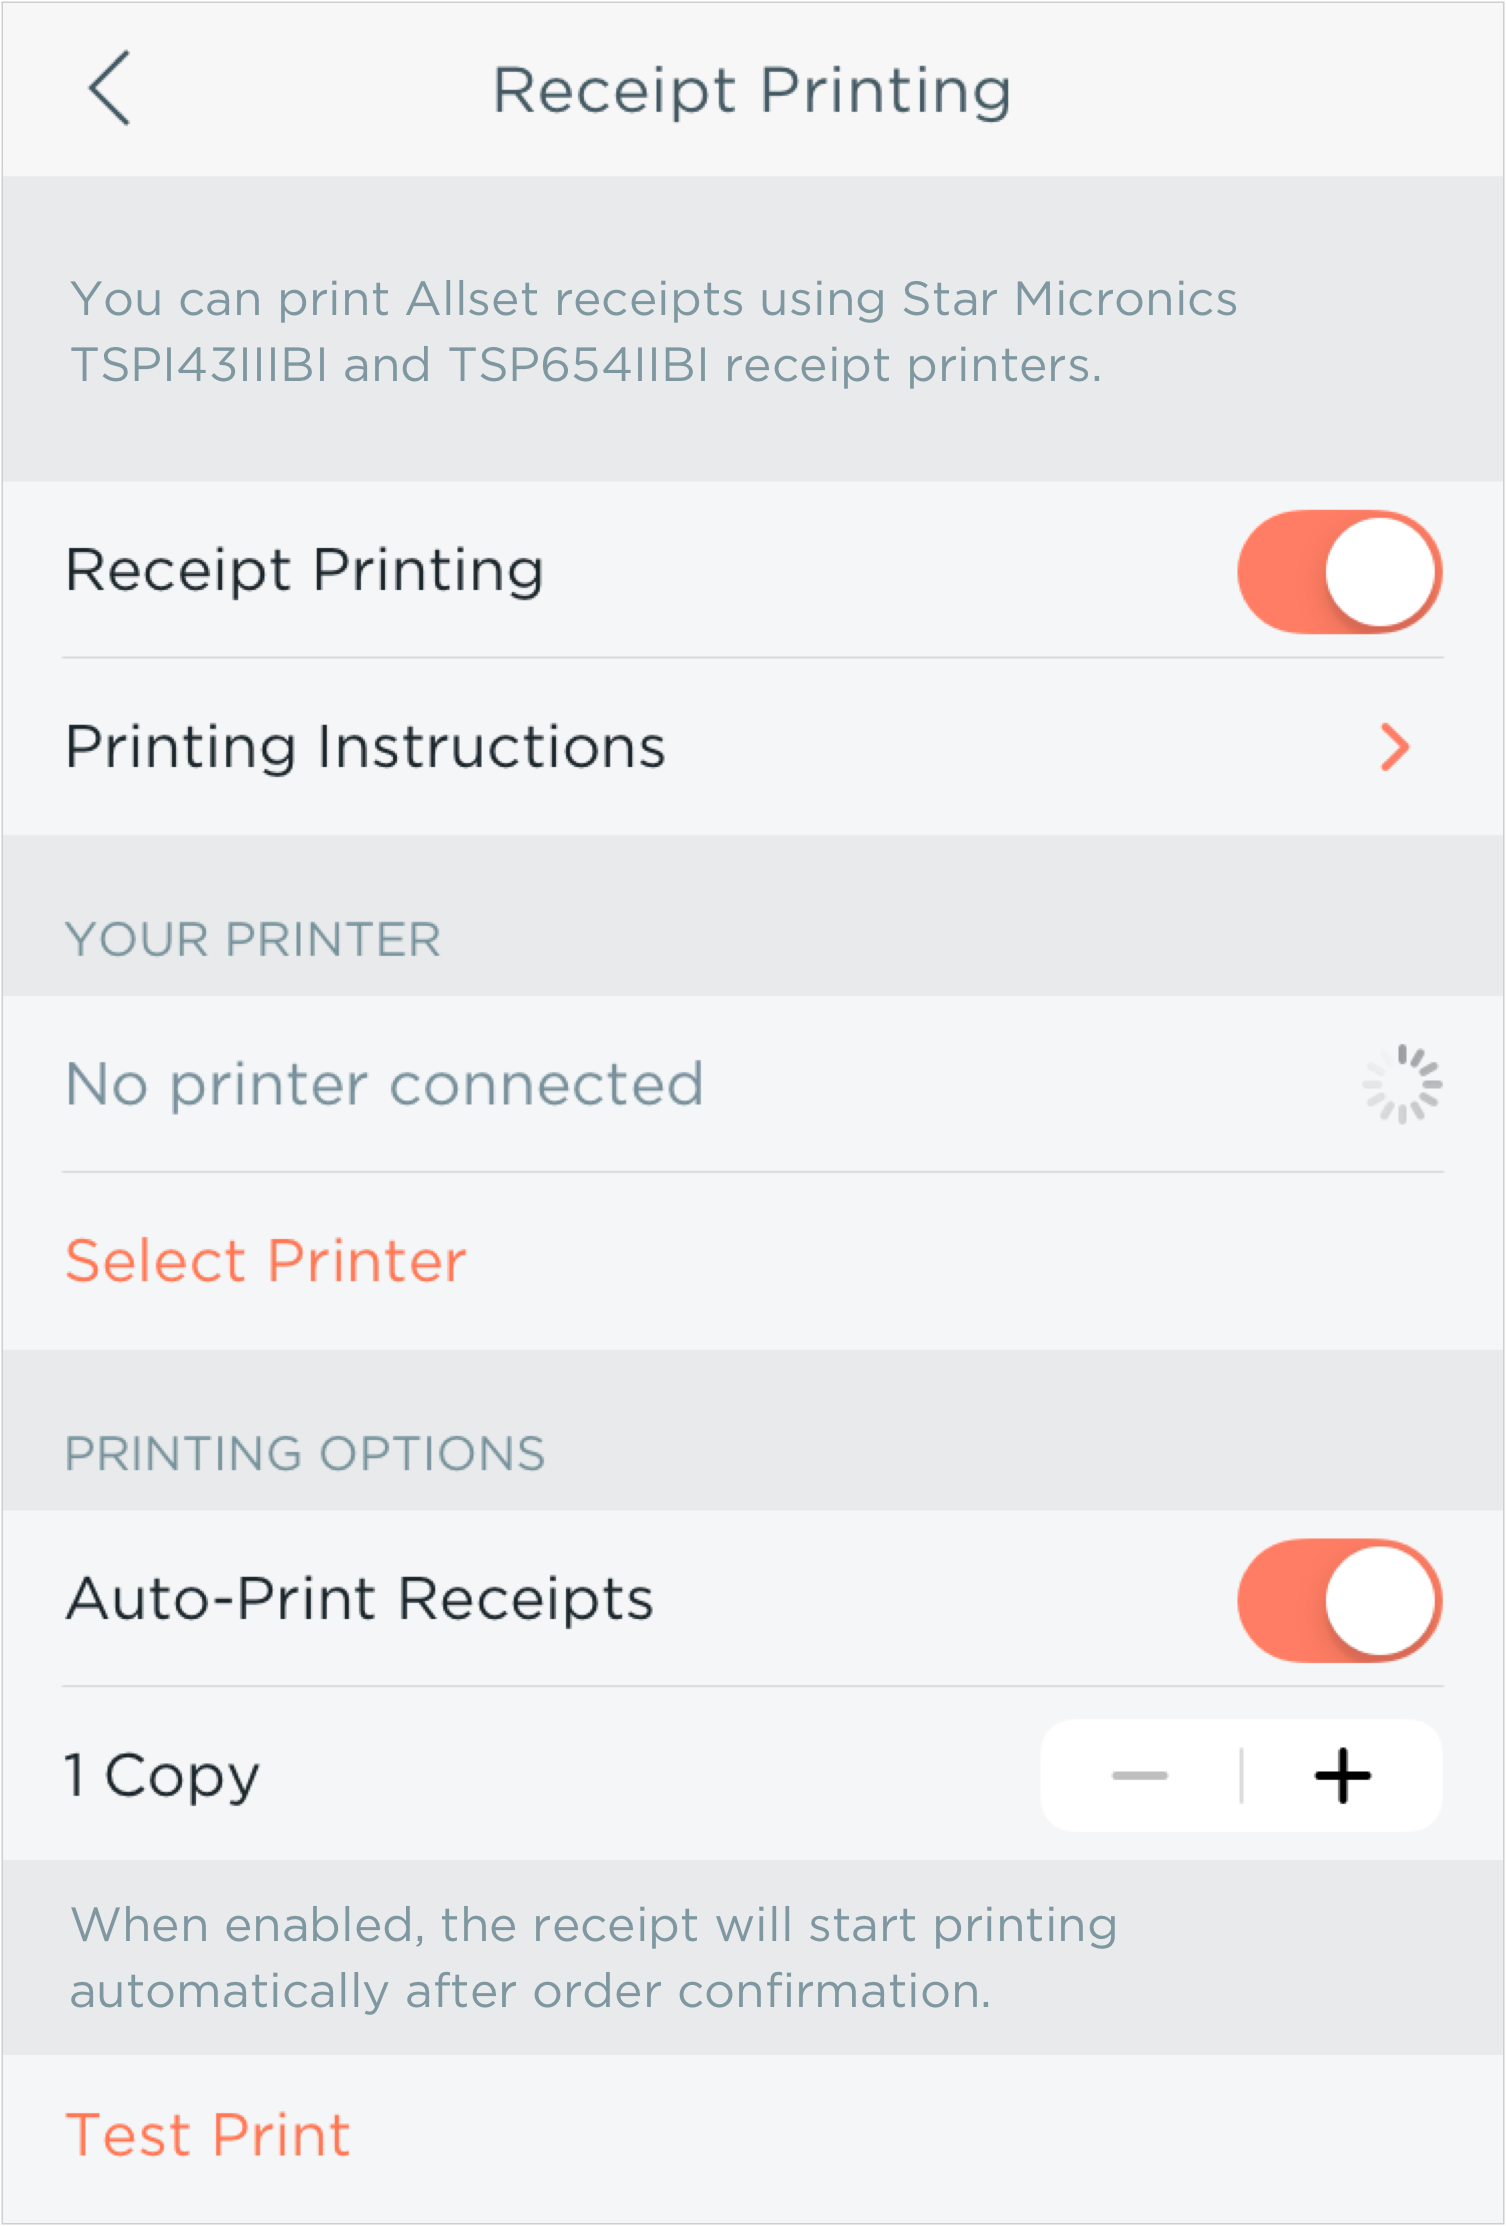 To enable receipt printing, turn the “Receipt Printing” toggle ON.